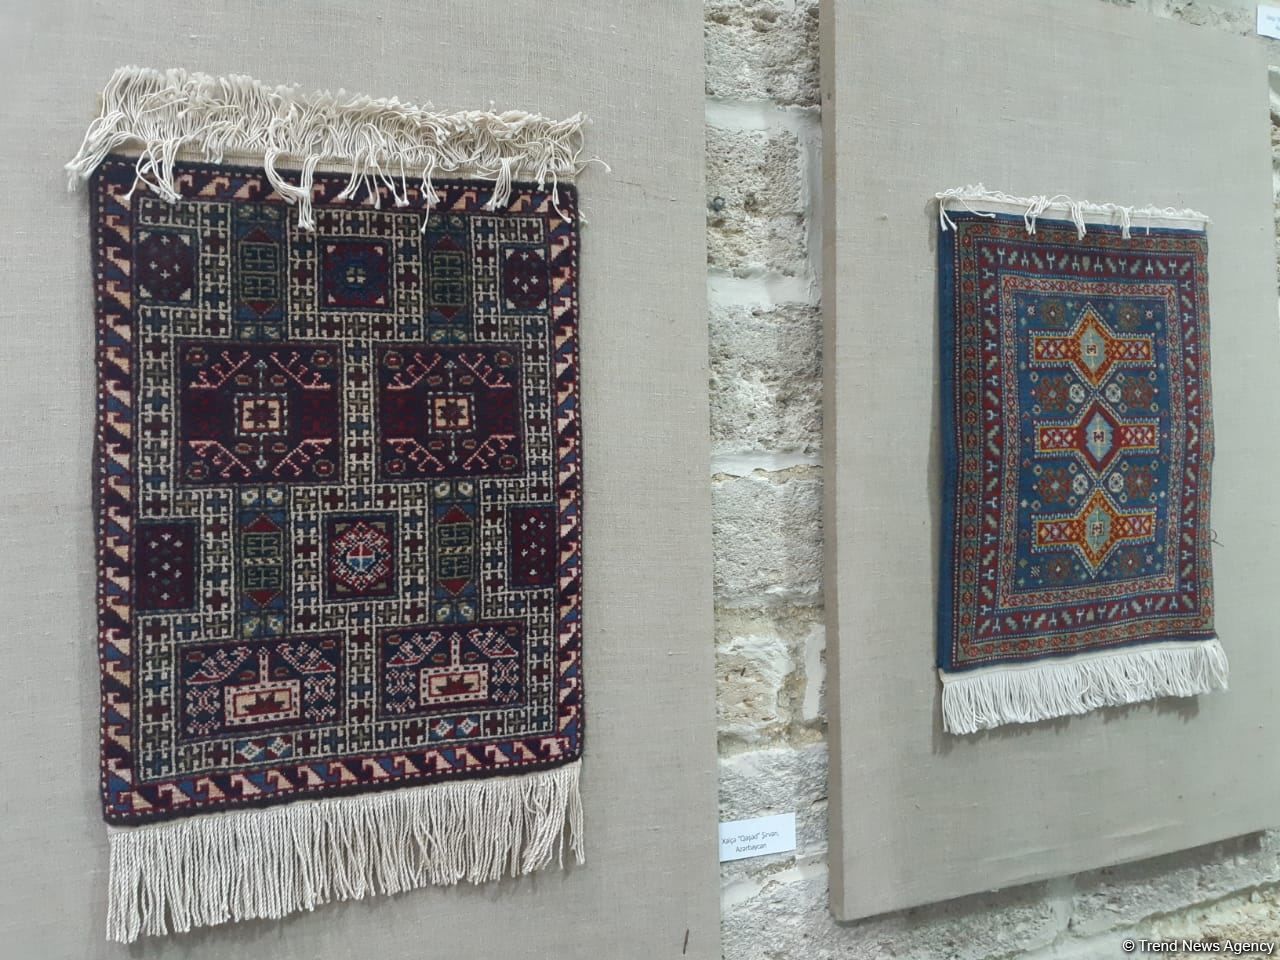 Magnificent carpets demonstrated within European Artistic Crafts Days [PHOTOS] - Gallery Image